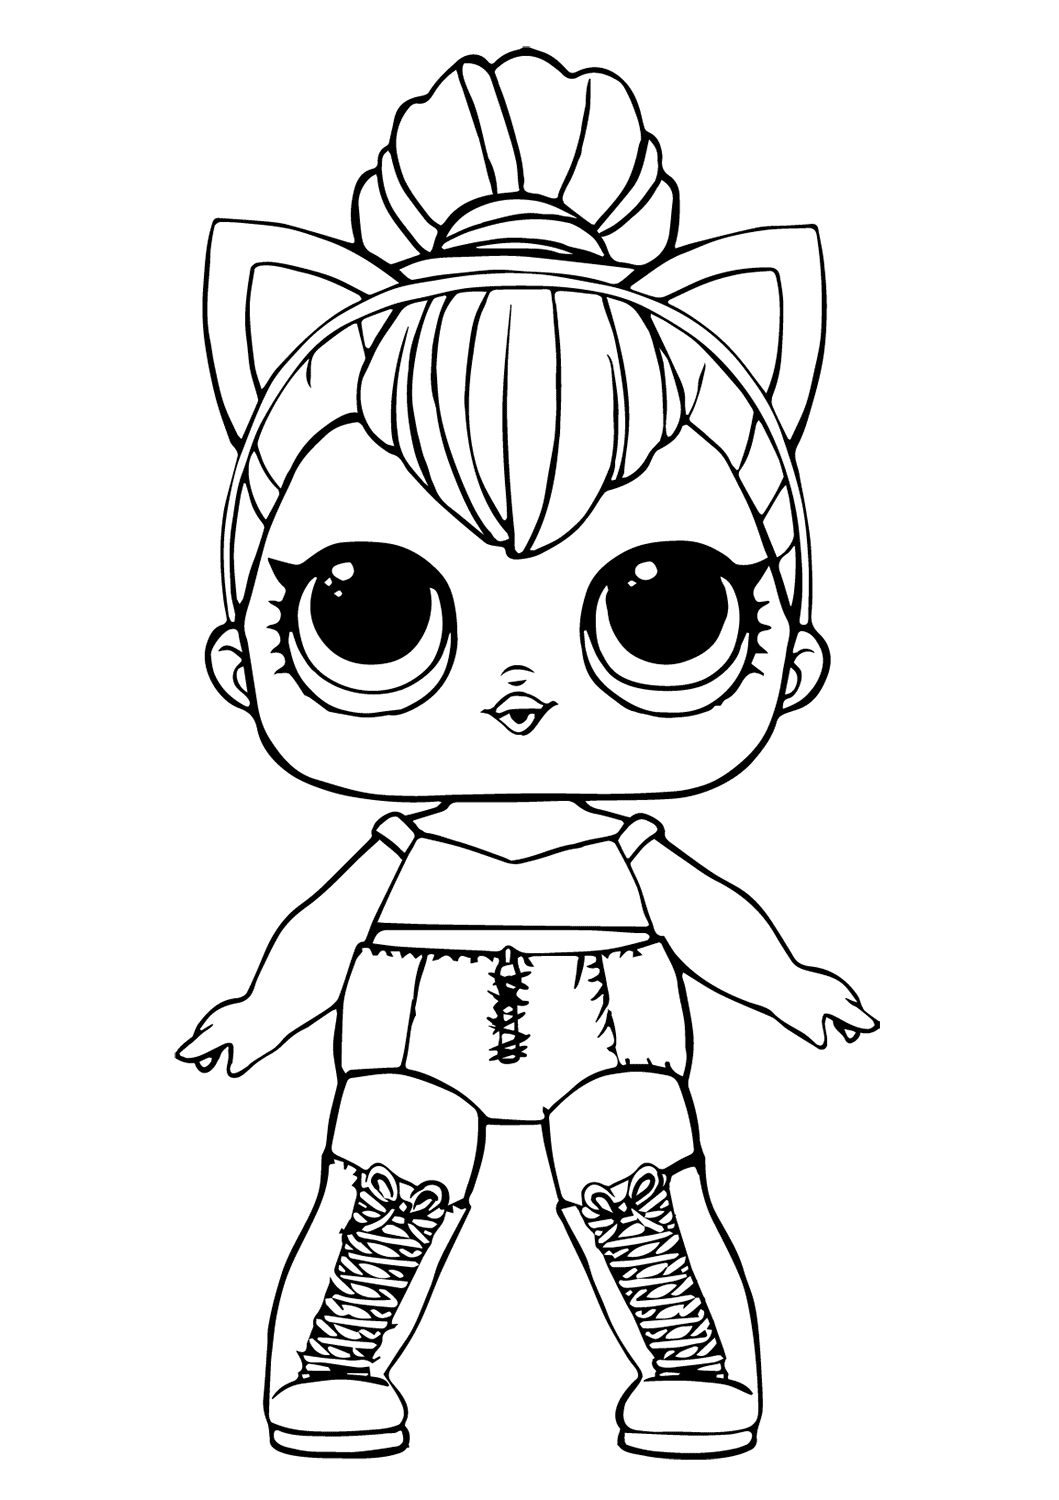 Kitty Queen Lol Doll Coloring Page   Free Printable Coloring Pages for Kids